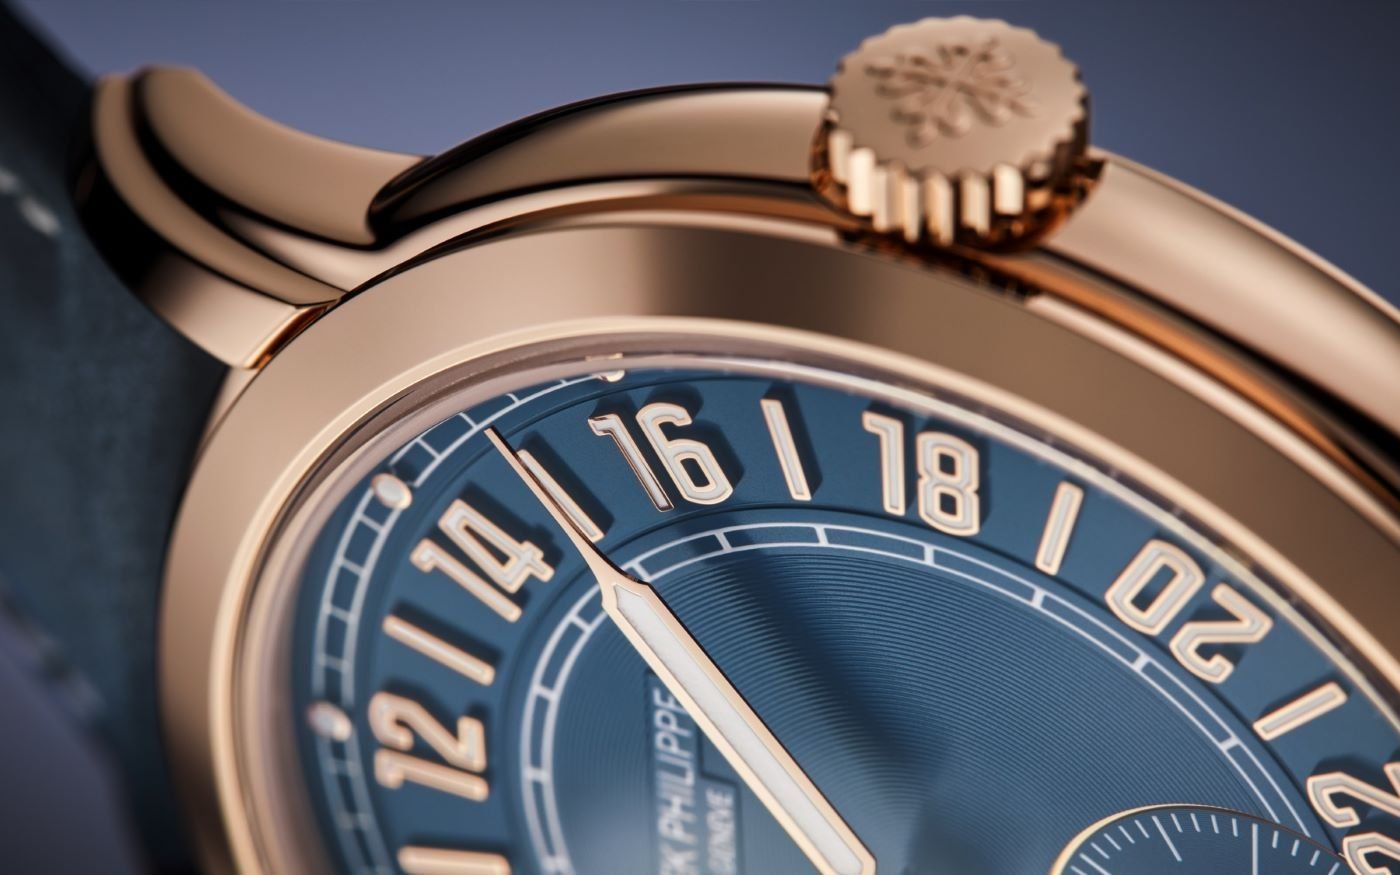 Patek Philippe’s All-New Calatrava REF. 5224R-001 Travel Time With A 24-Hour Display